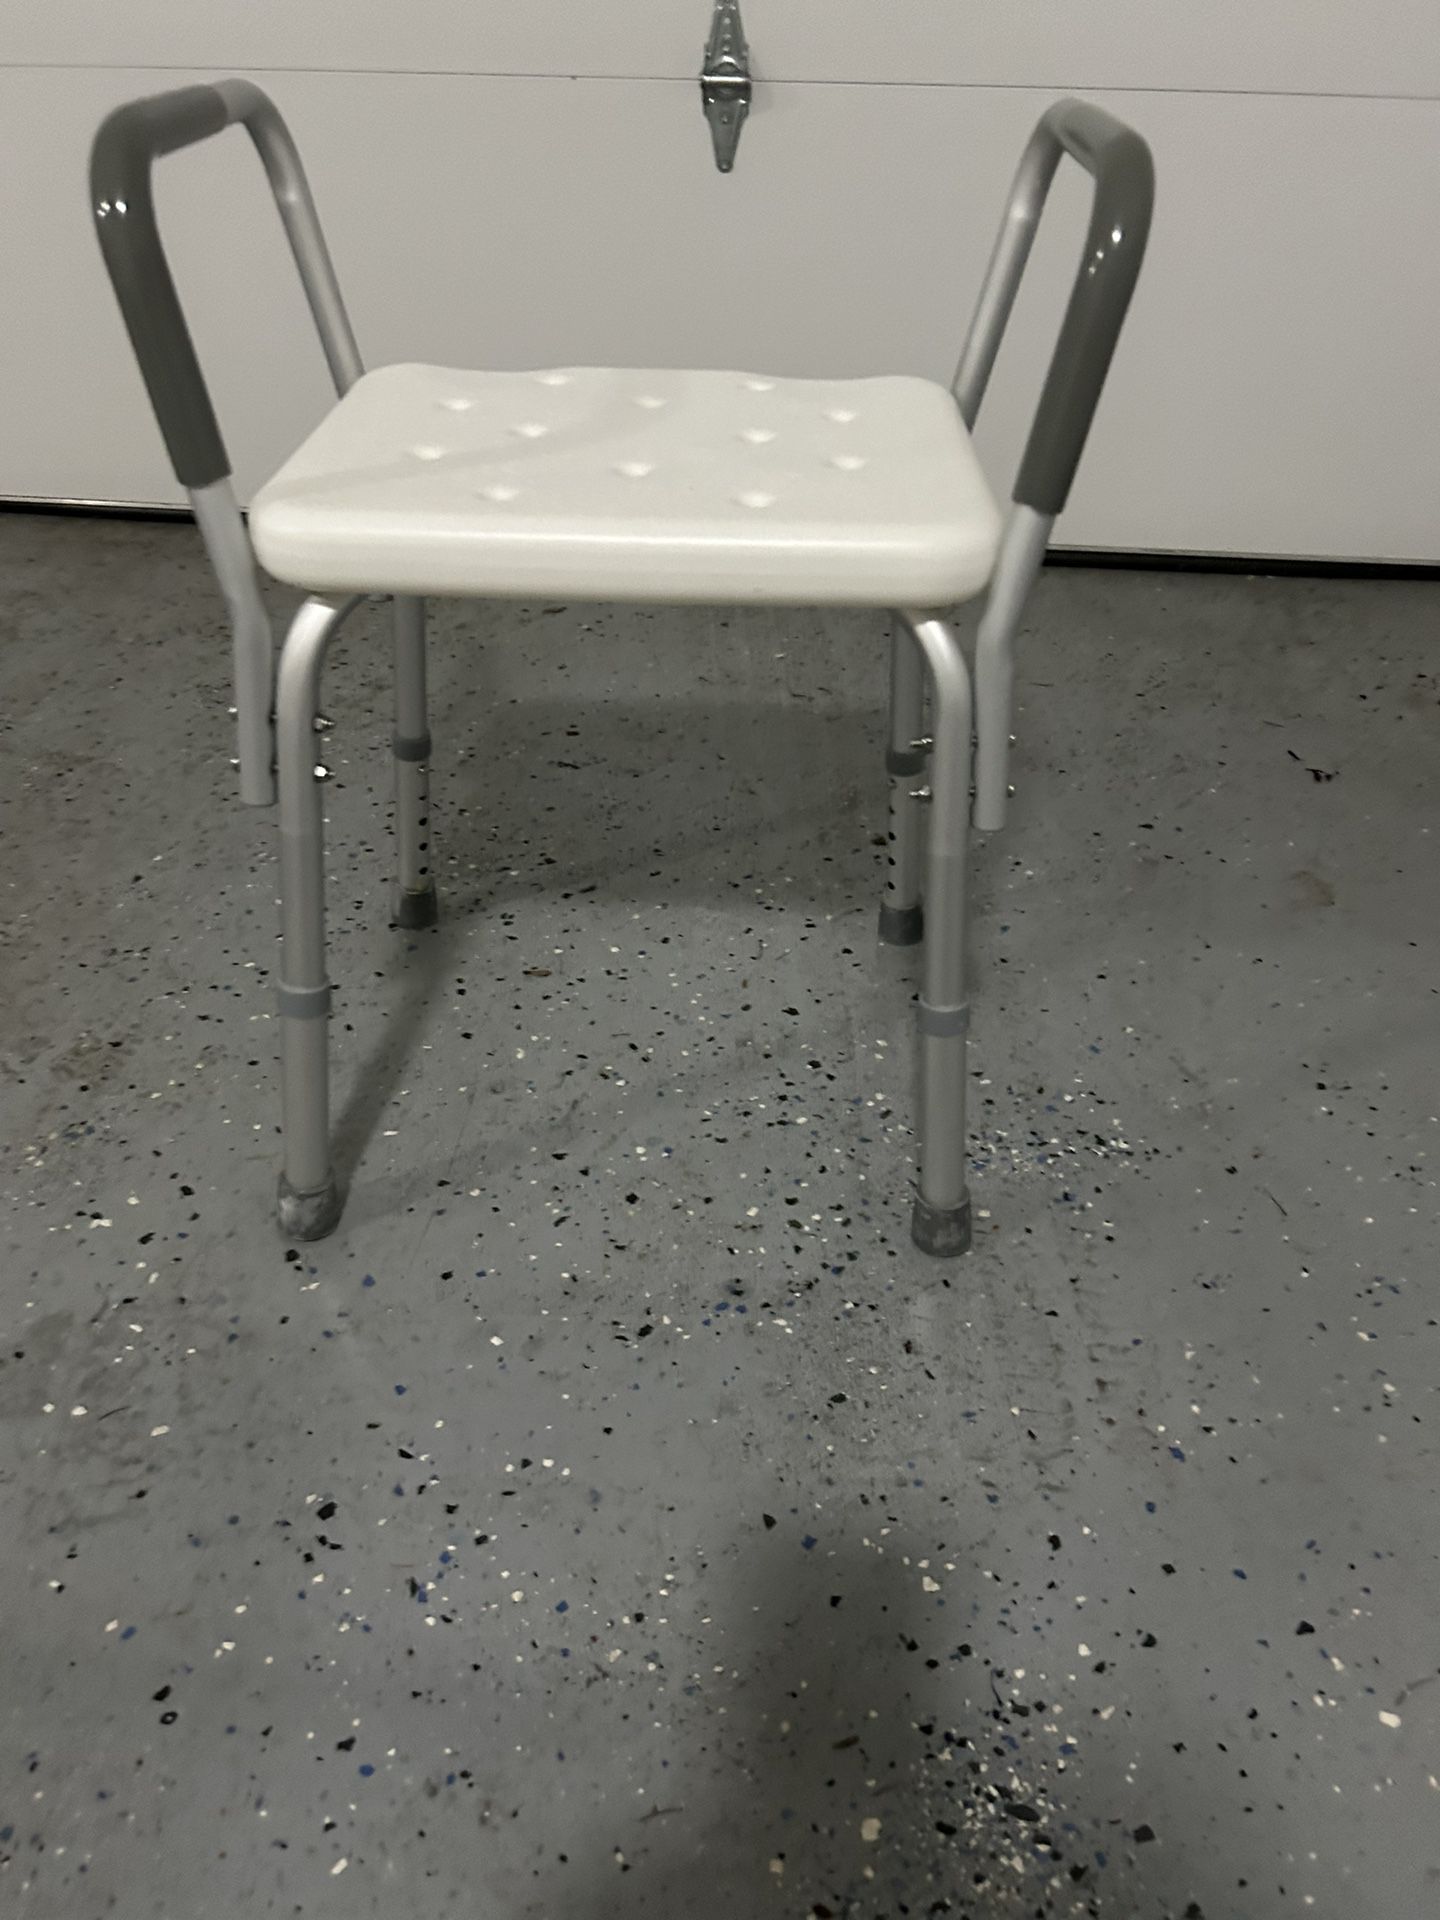 Shower Seat With Handles